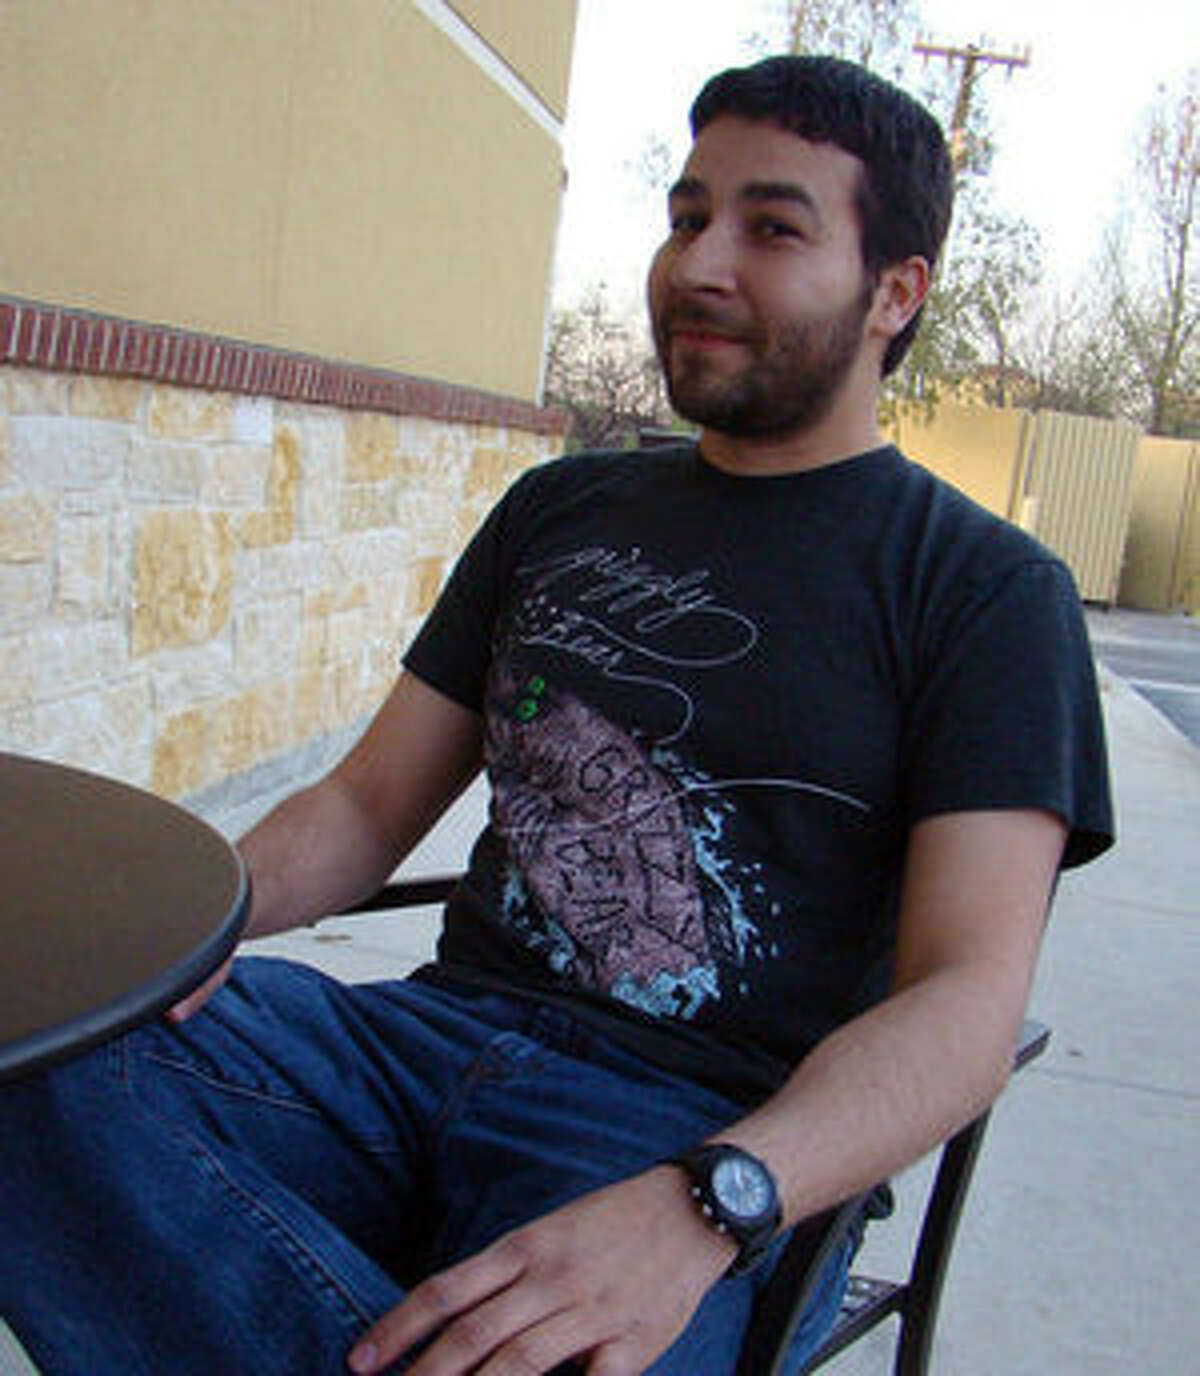 Filmmaker Sam Lerma is screening his movie ?Trash Day? at the South by Southwest Film Festival in Austin.